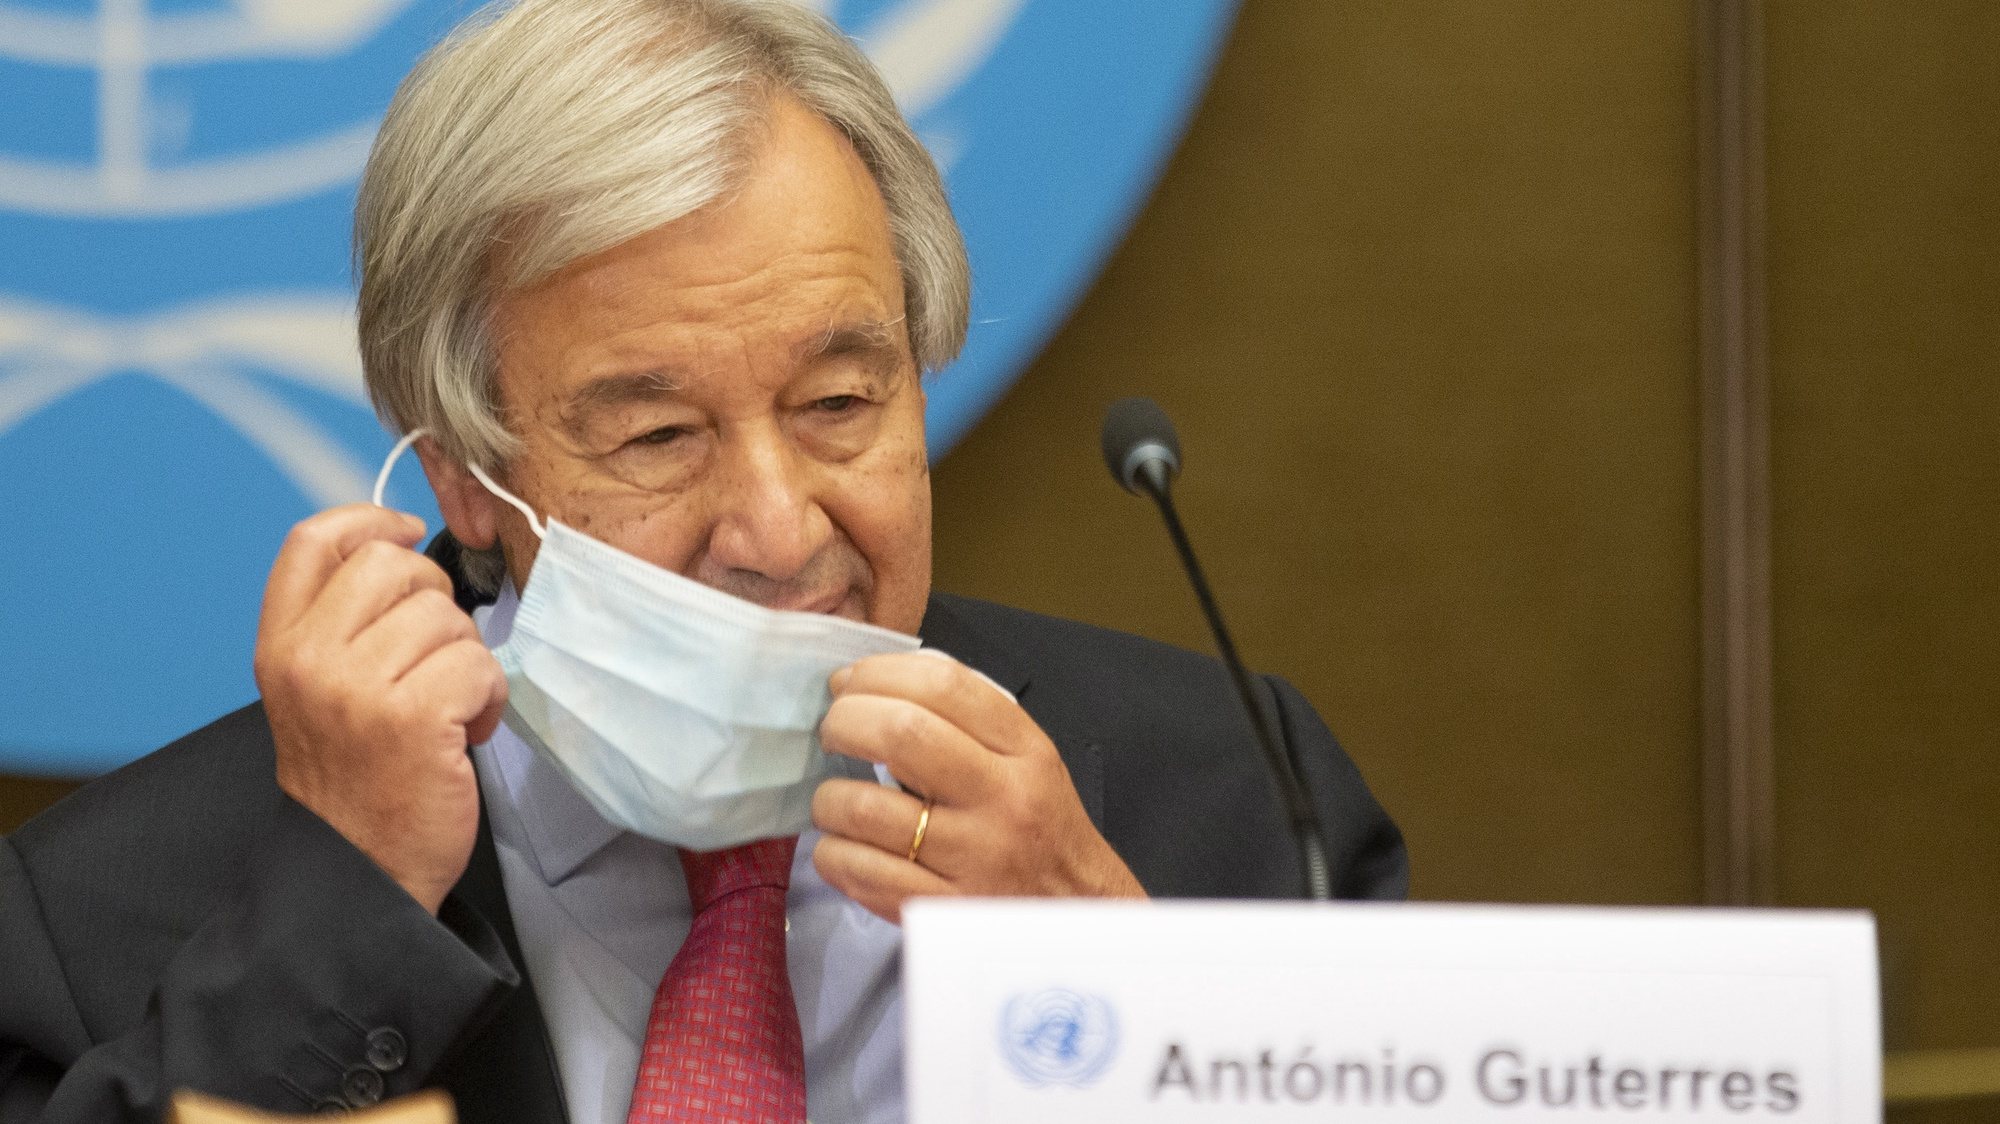 epa09465784 U.N. Secretary-General Antonio Guterres removes his protective face mask at a press conference, during the High-Level Ministerial Event on the Humanitarian Situation in Afghanistan, at the European headquarters of the United Nation, in Geneva, Switzerland, 13 September 2021.  EPA/SALVATORE DI NOLFI